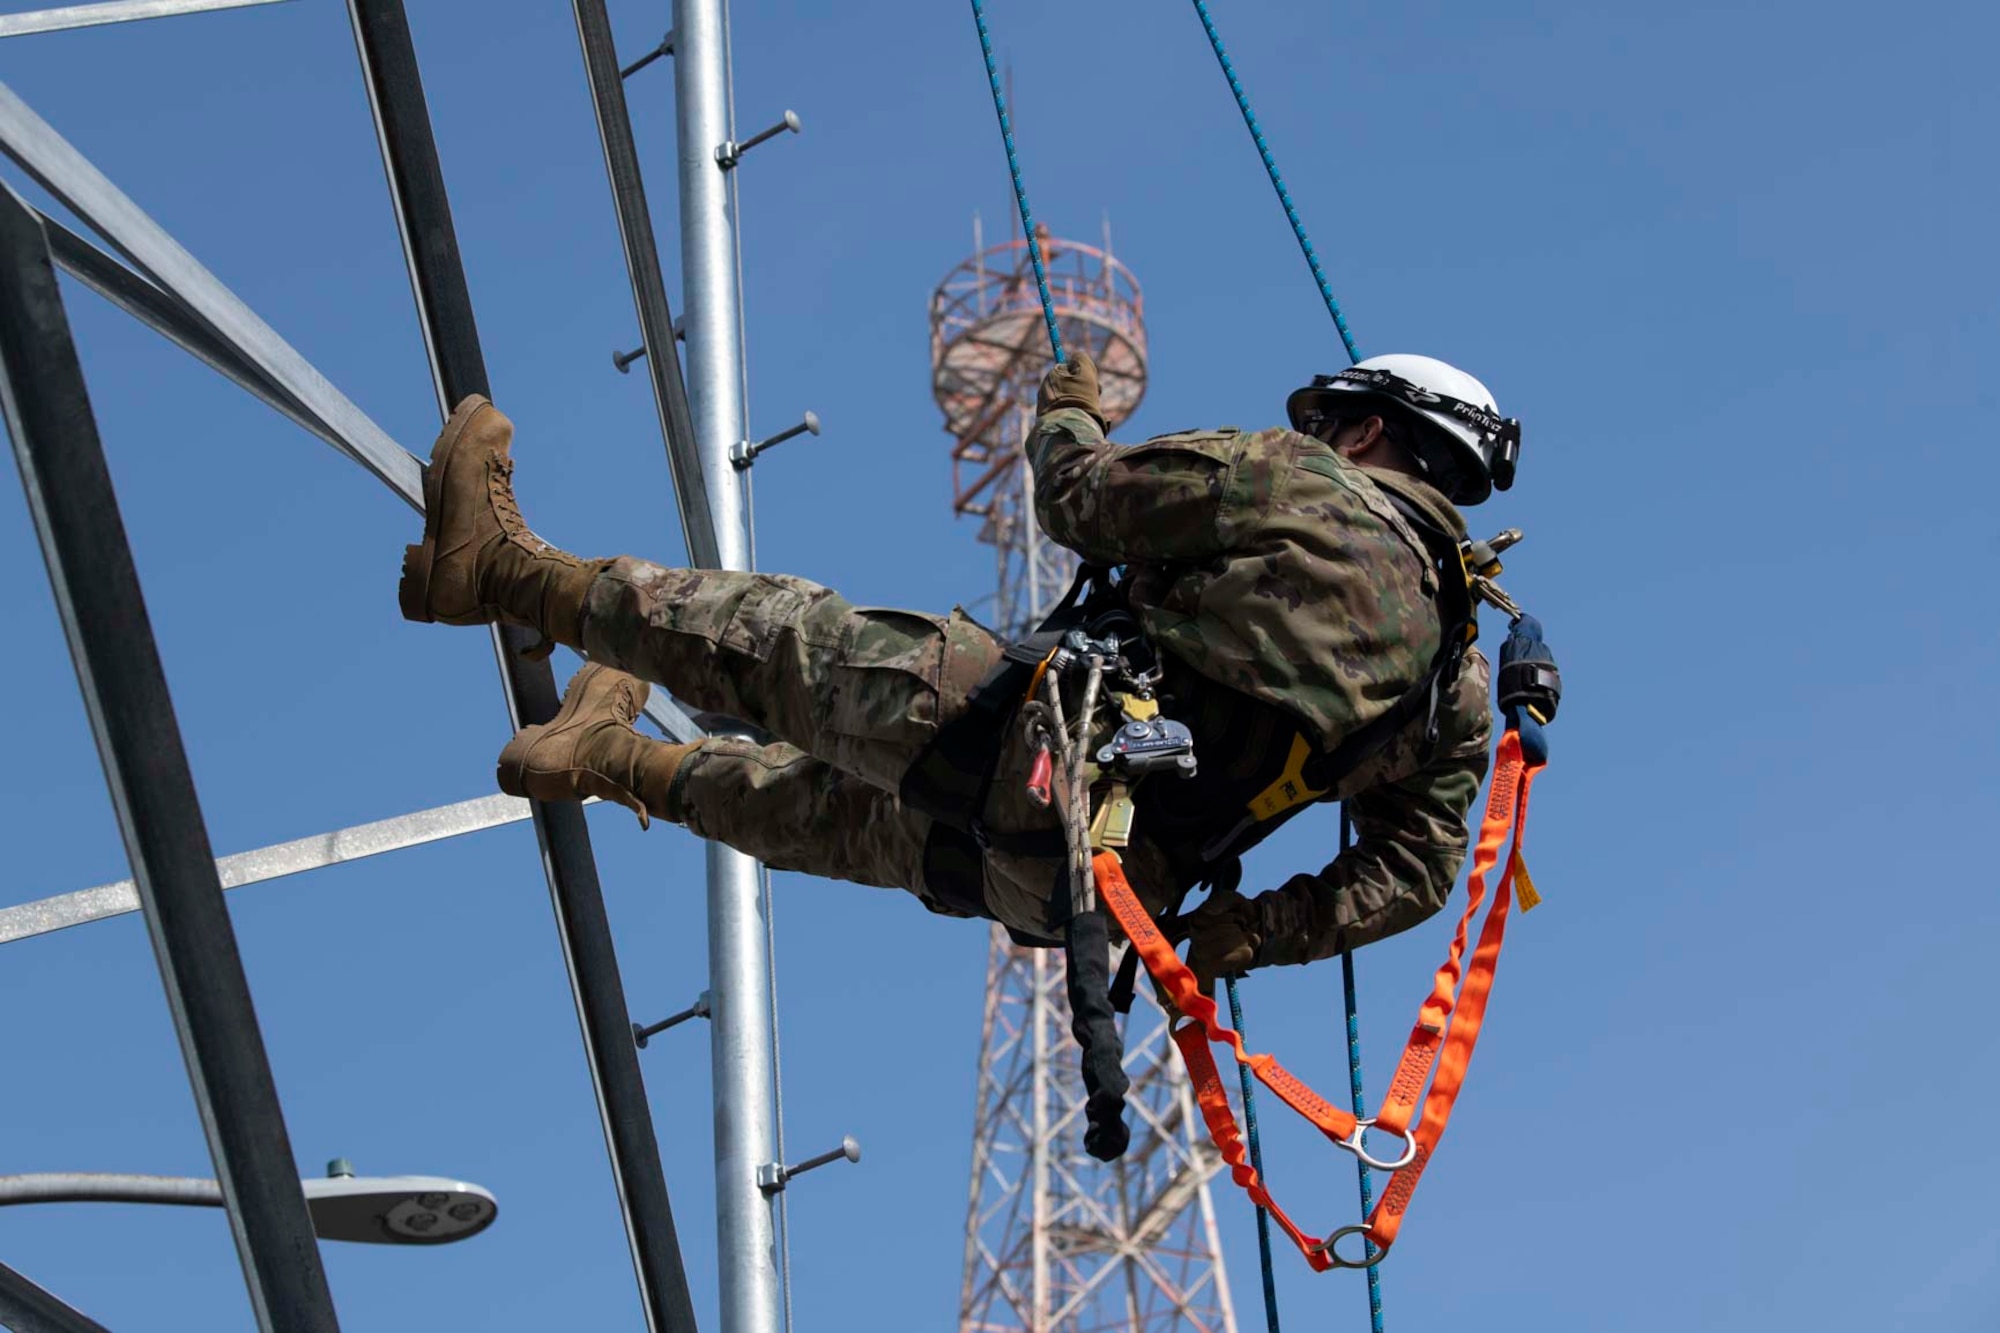 A military member rappels down a tower.